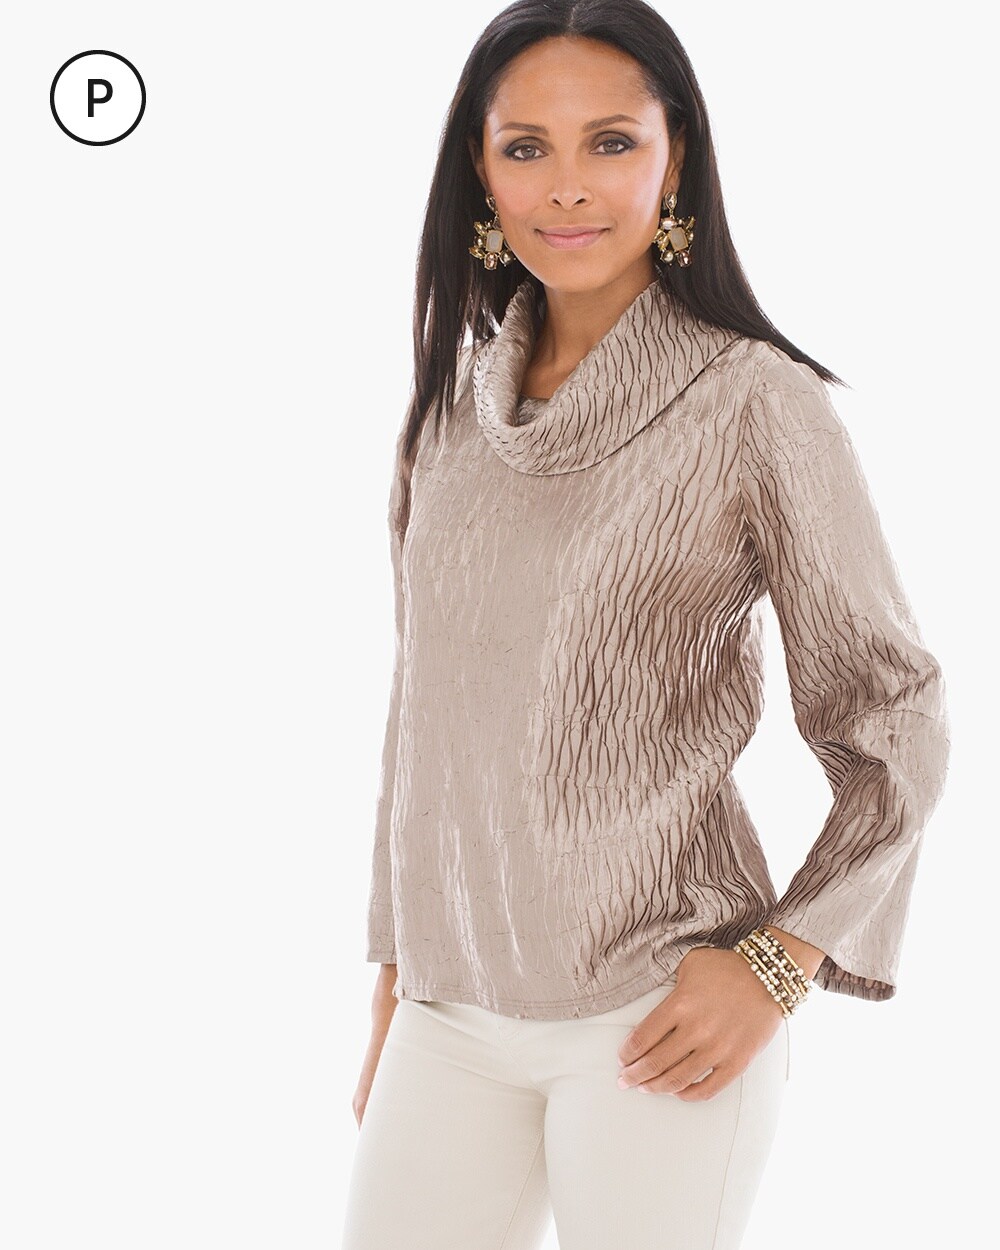 Travelers Collection Petite Crushed Shine Top